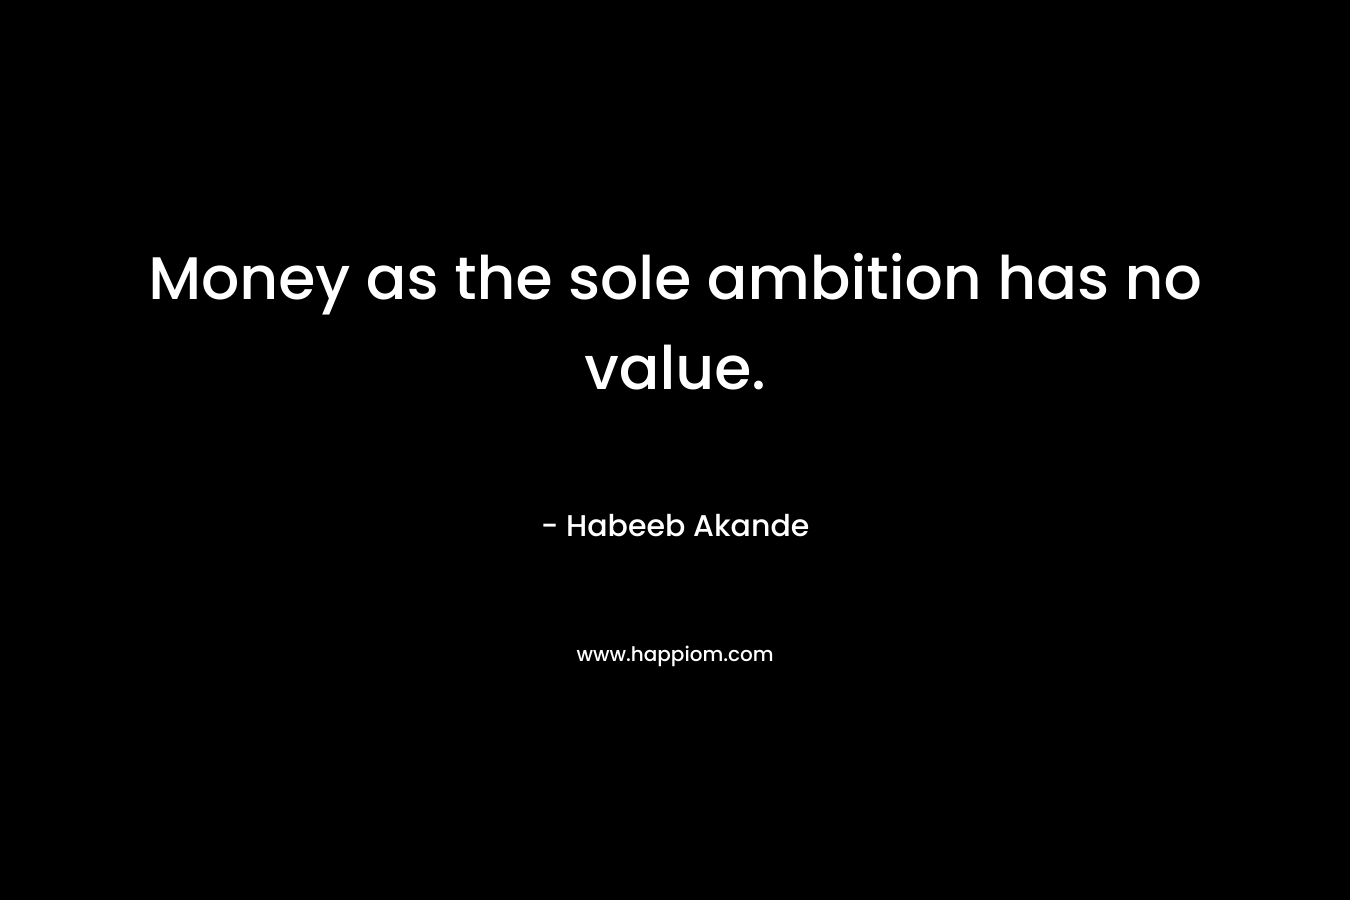 Money as the sole ambition has no value.